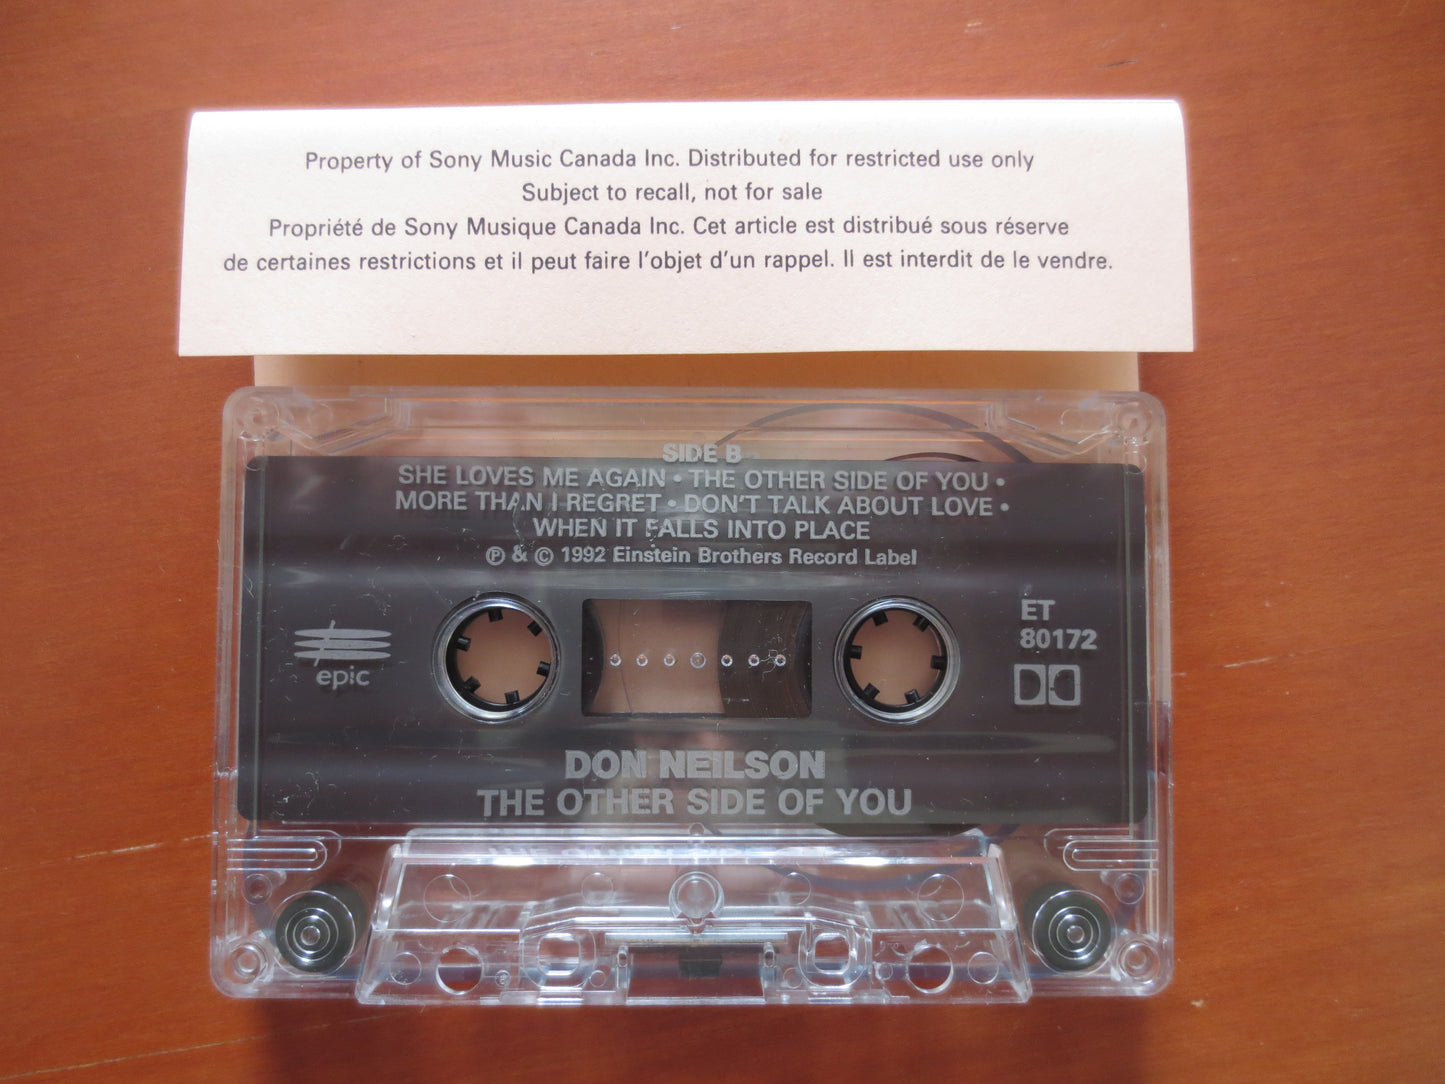 DON NEILSON, Other Side of You, Country Tape, Don Neilson Lp, Don Neilson Tape, Cassette Lp, Rock Cassette, 1992 Cassette